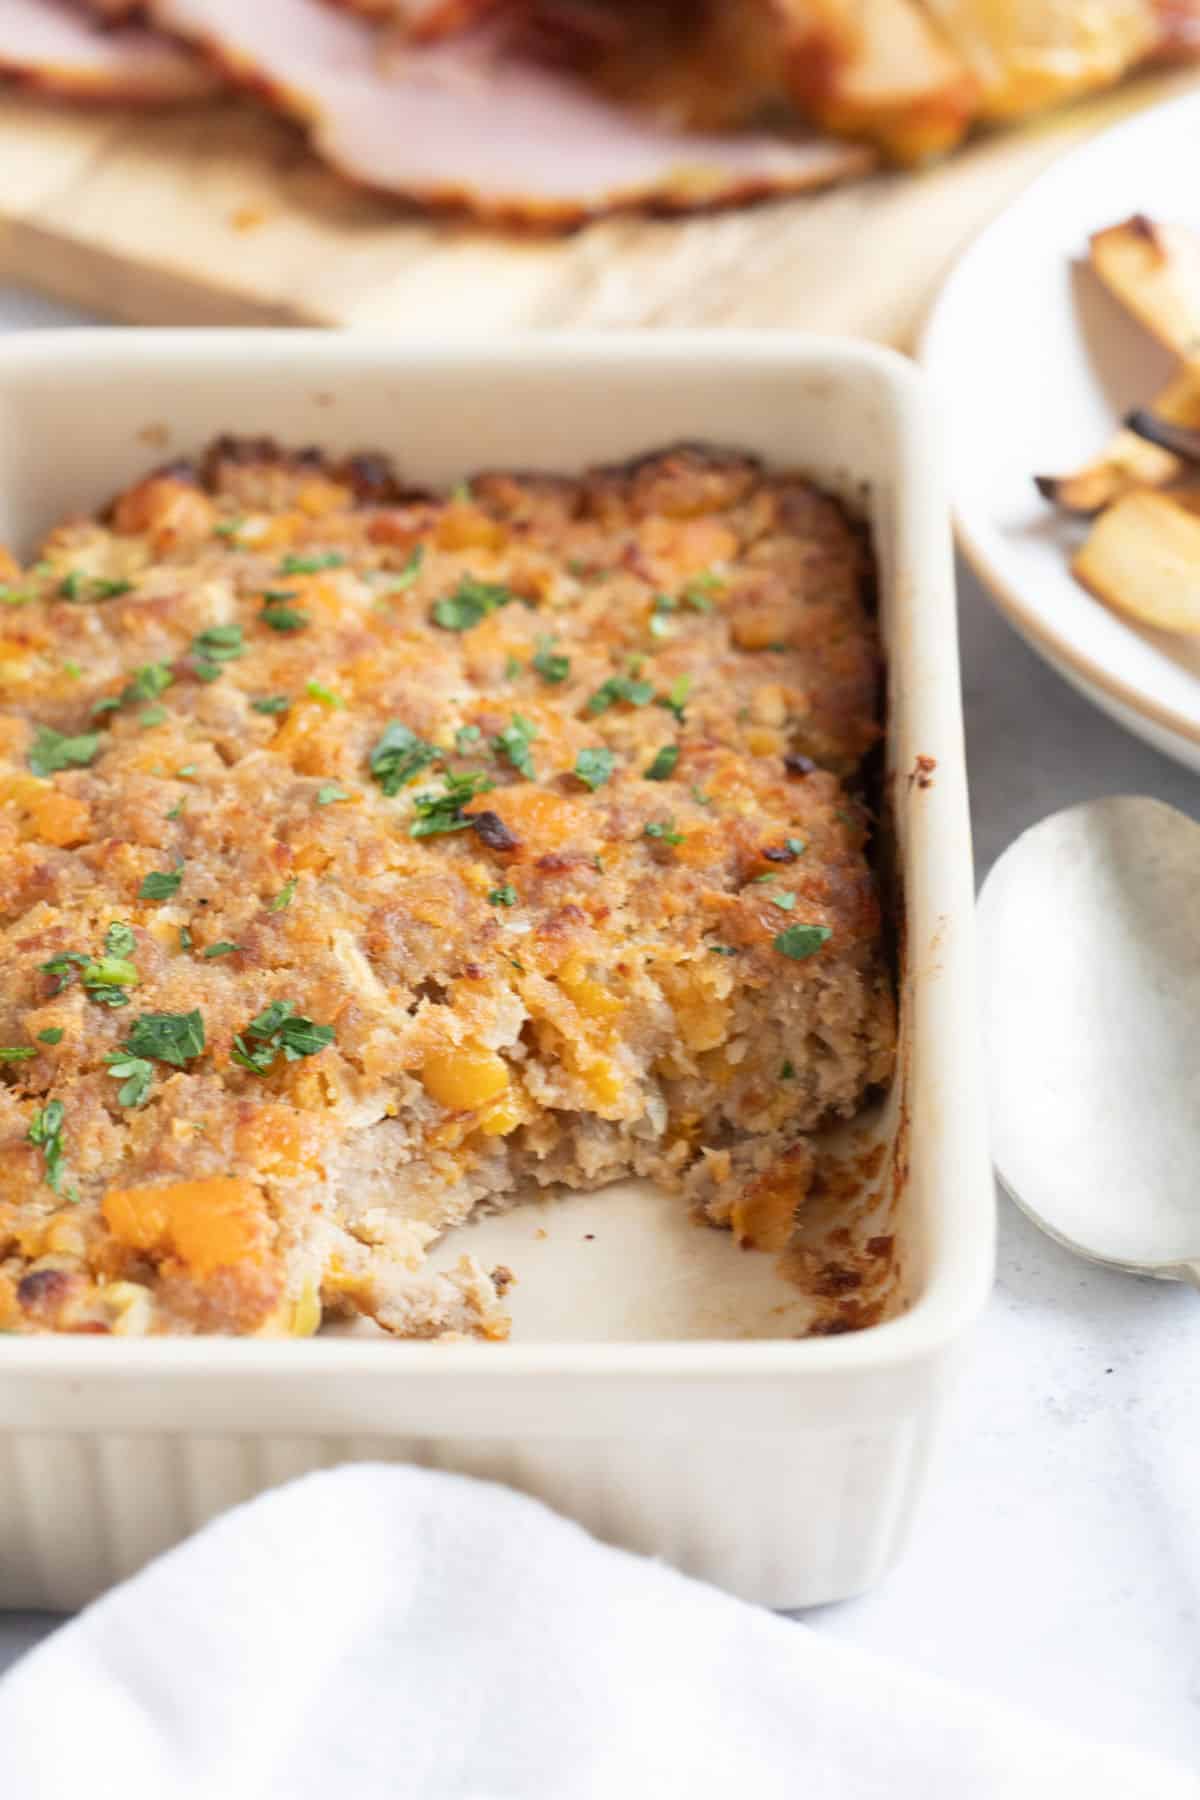 Apricot stuffing in a baking dish.